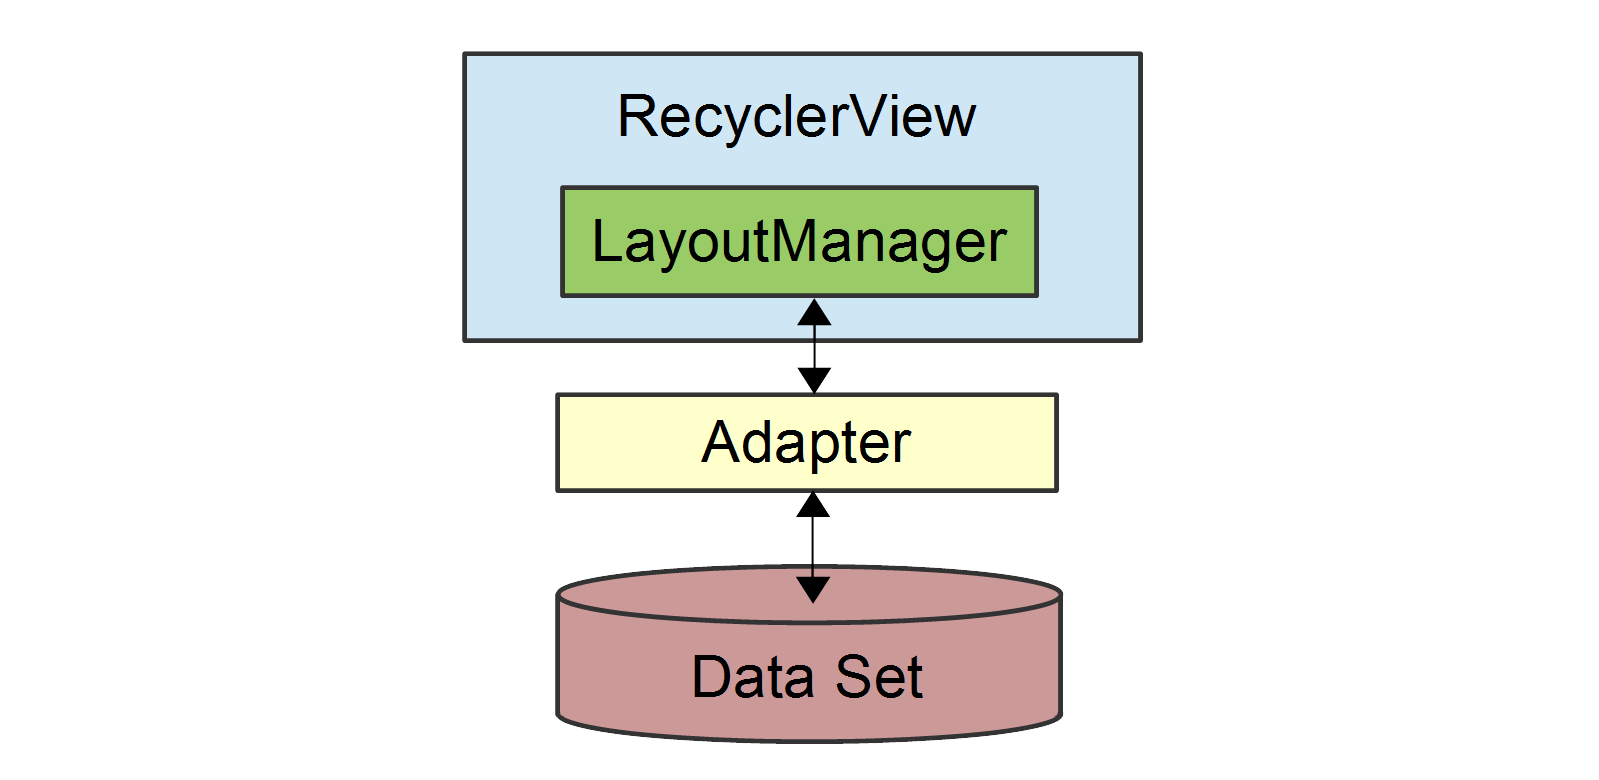 Diagram of RecyclerView containing LayoutManager, using Adapter to access Data Set